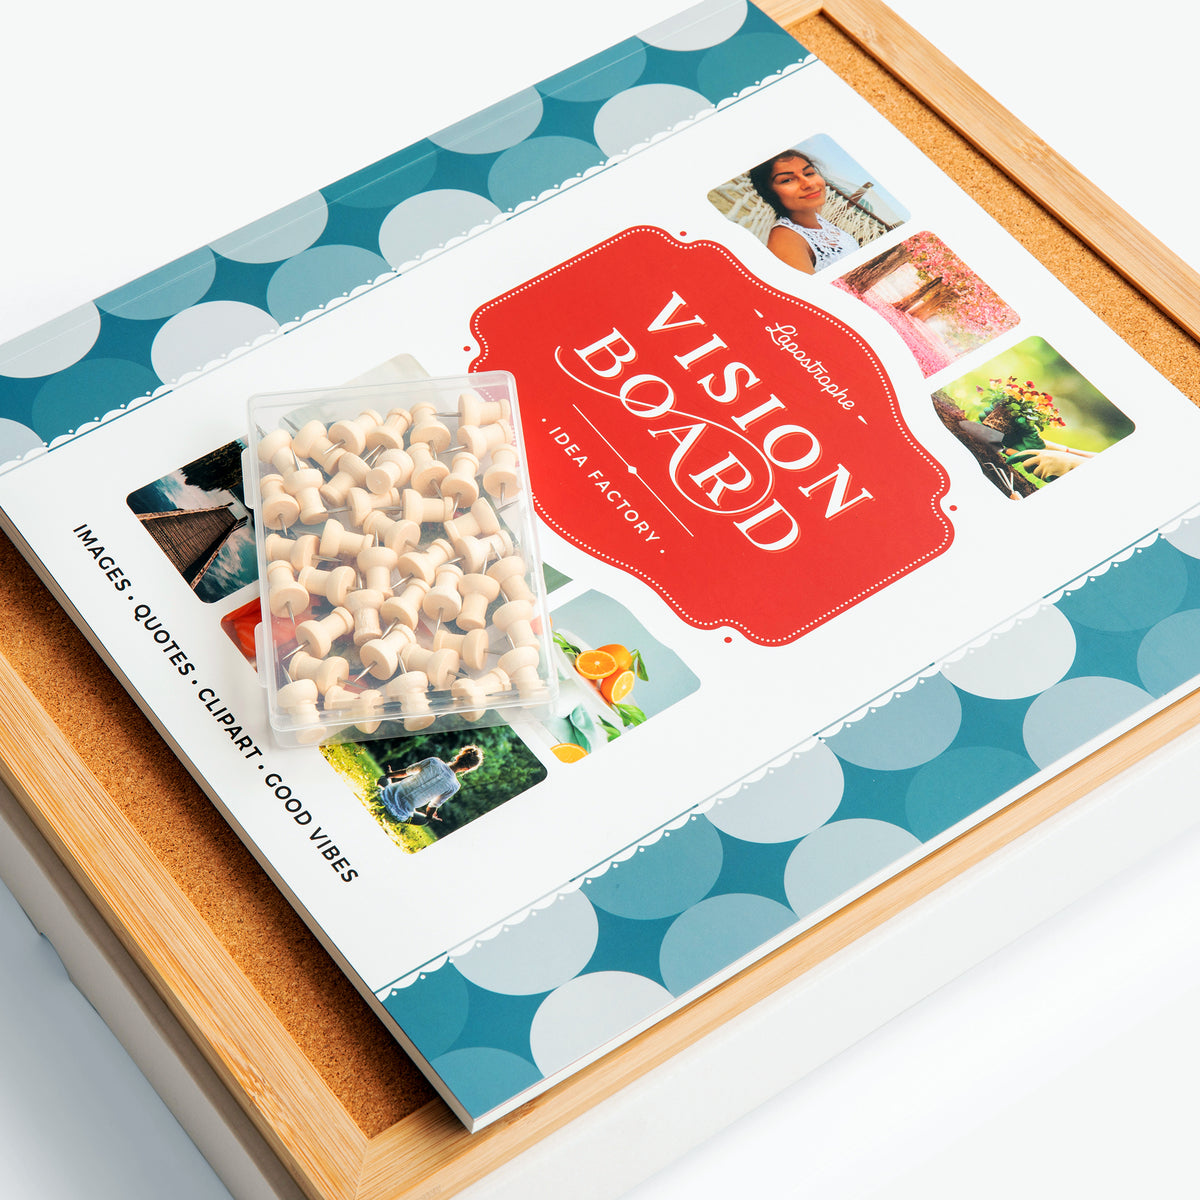 FabSelf Vision Board Kit for Women - Vision Board Supplies - 3 Section Folded Board with 160 Vision Cards with Images and Quotes and Workbook 